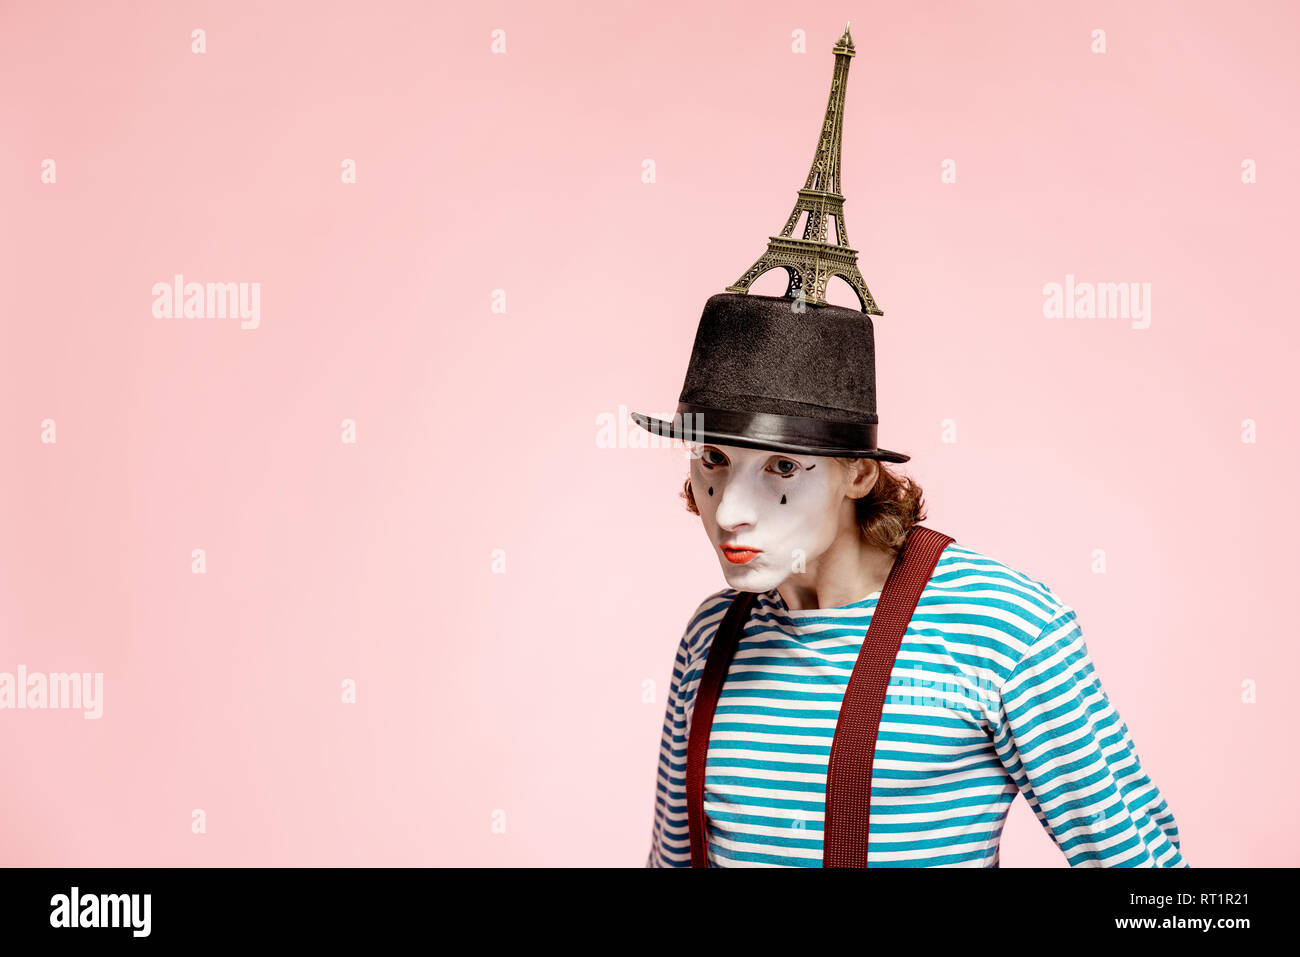 Pantomime with white facial makeup posing with Eiffel tower on the pink background. French mime concept Stock Photo